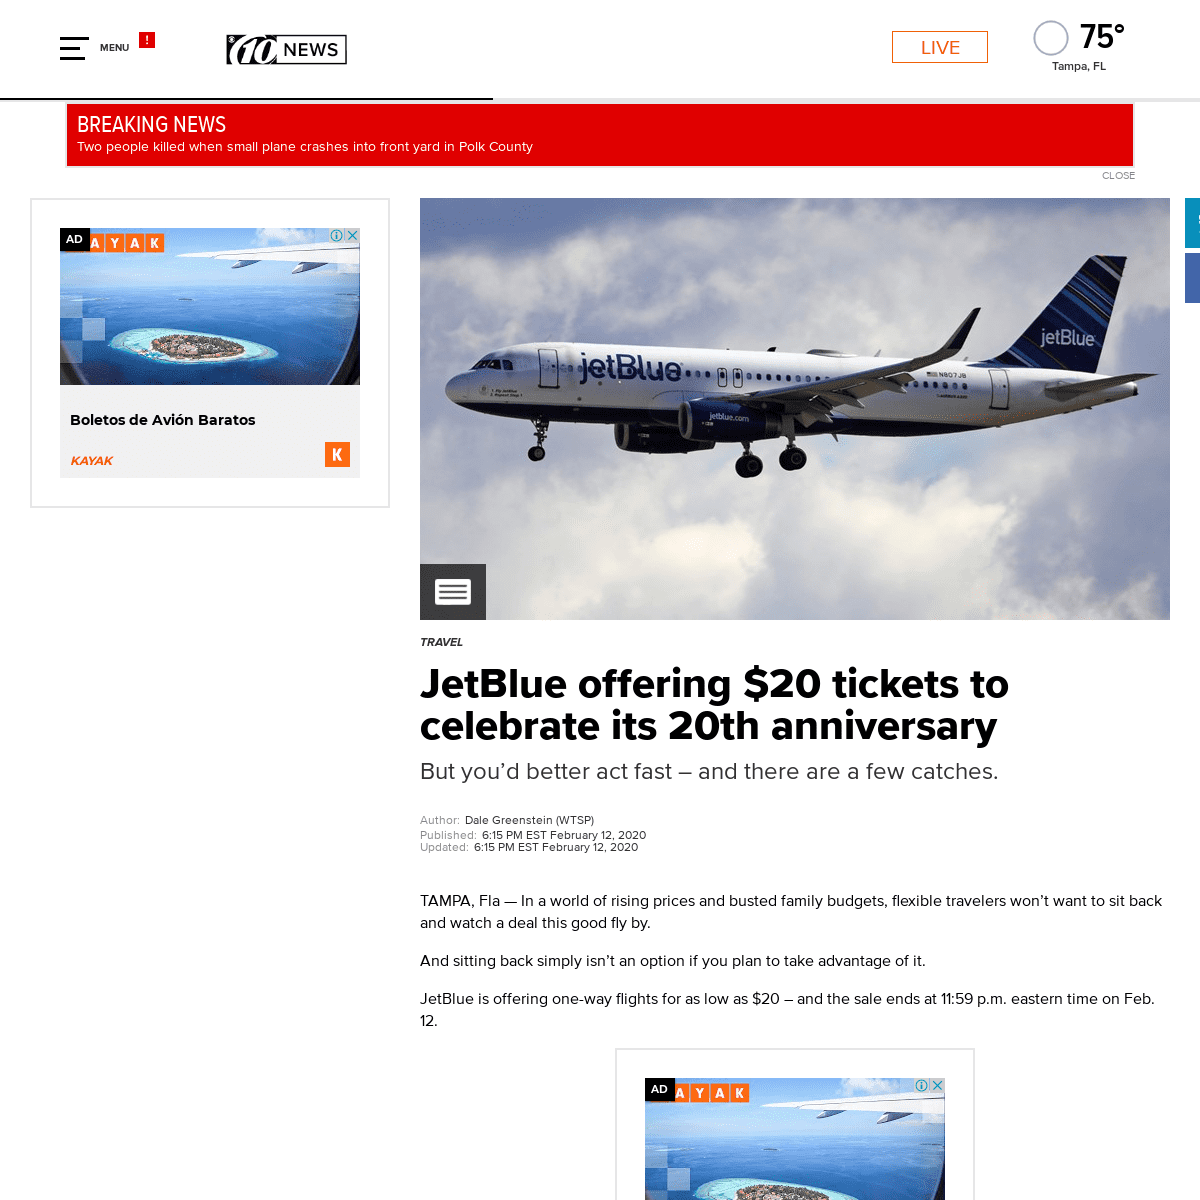 A complete backup of www.wtsp.com/article/travel/jetblue-offering-20-tickets-to-celebrate-its-20th-anniversary/67-ac34565a-285e-